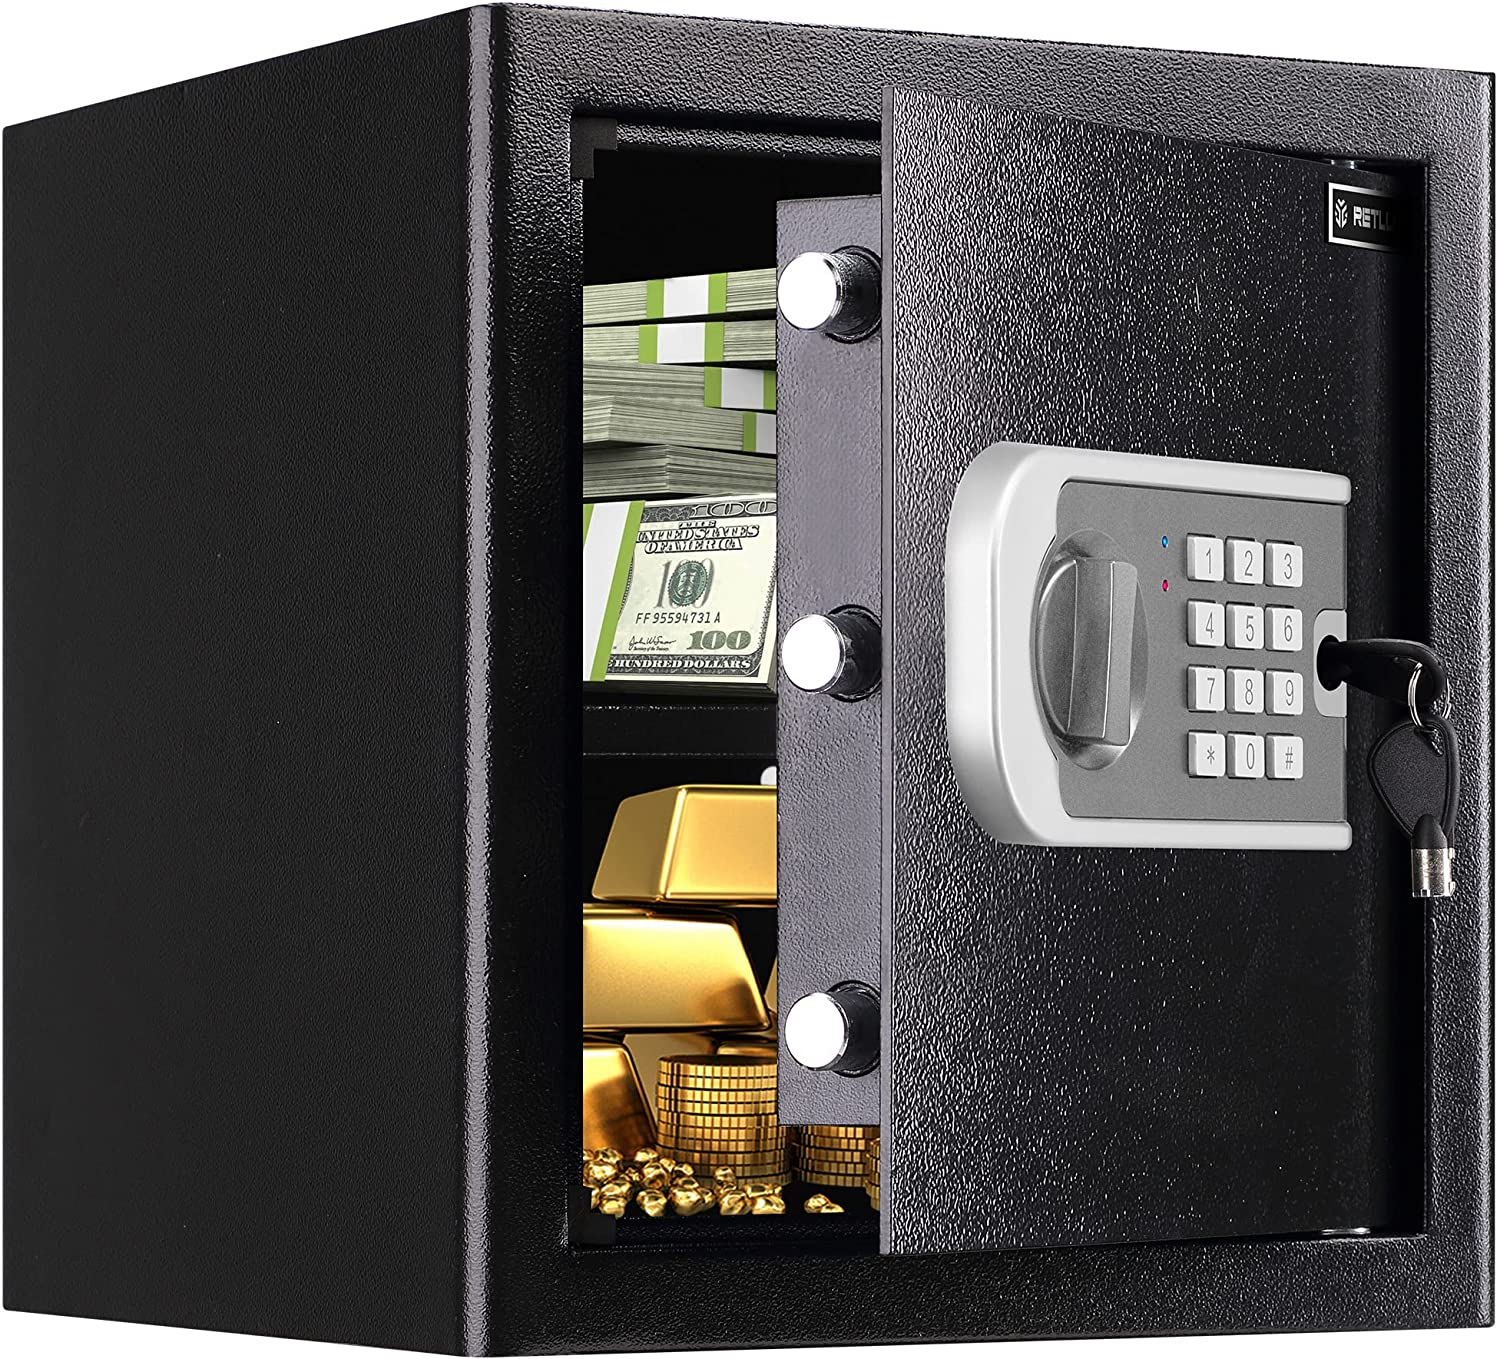 Home Safe Fireproof Waterproof,Fireproof Safe with [...]